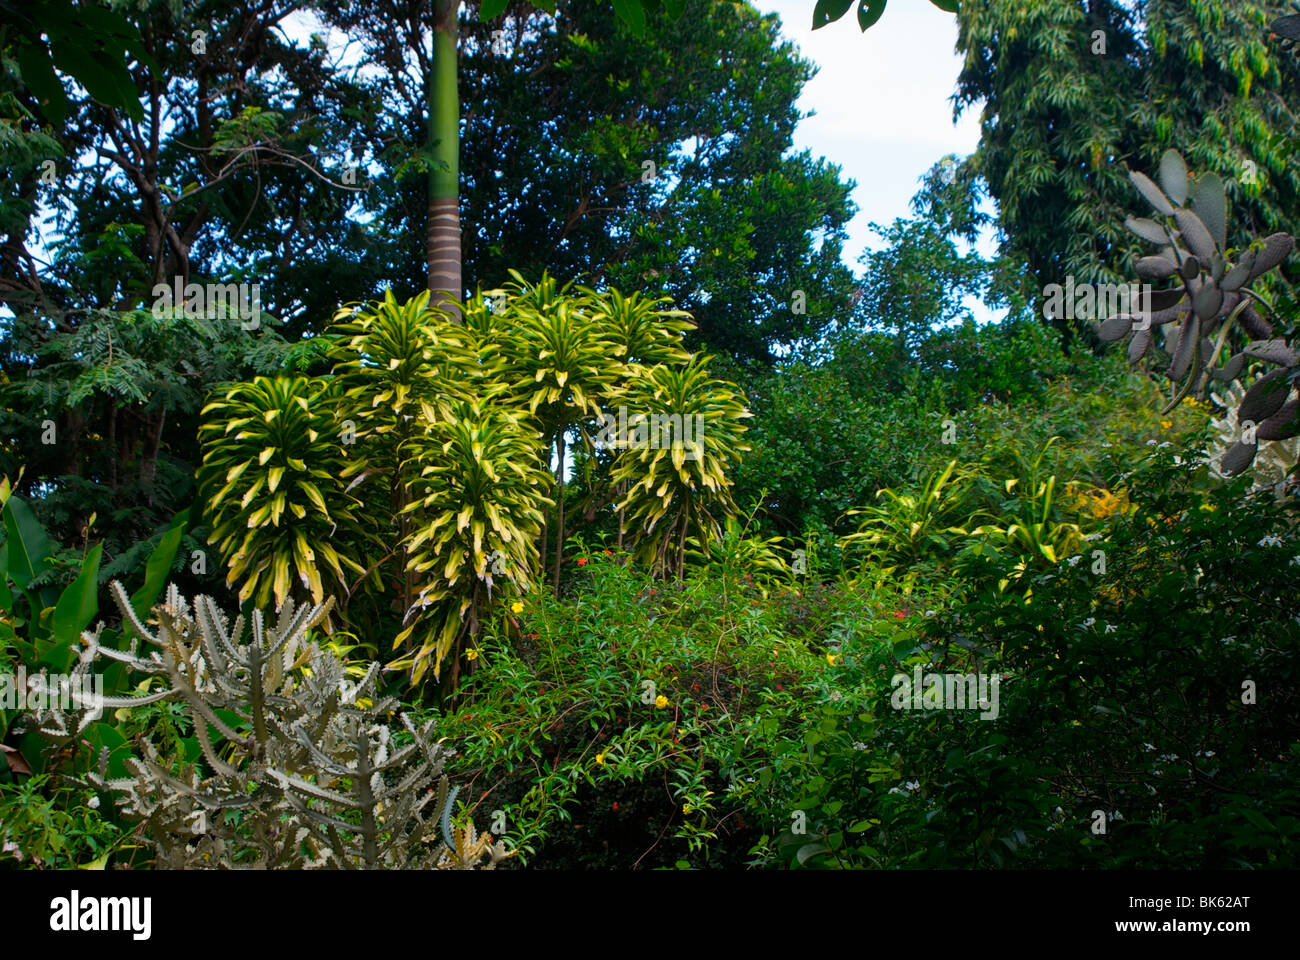 Tropical vegetation in garden on Barbados, West Indies. Stock Photo